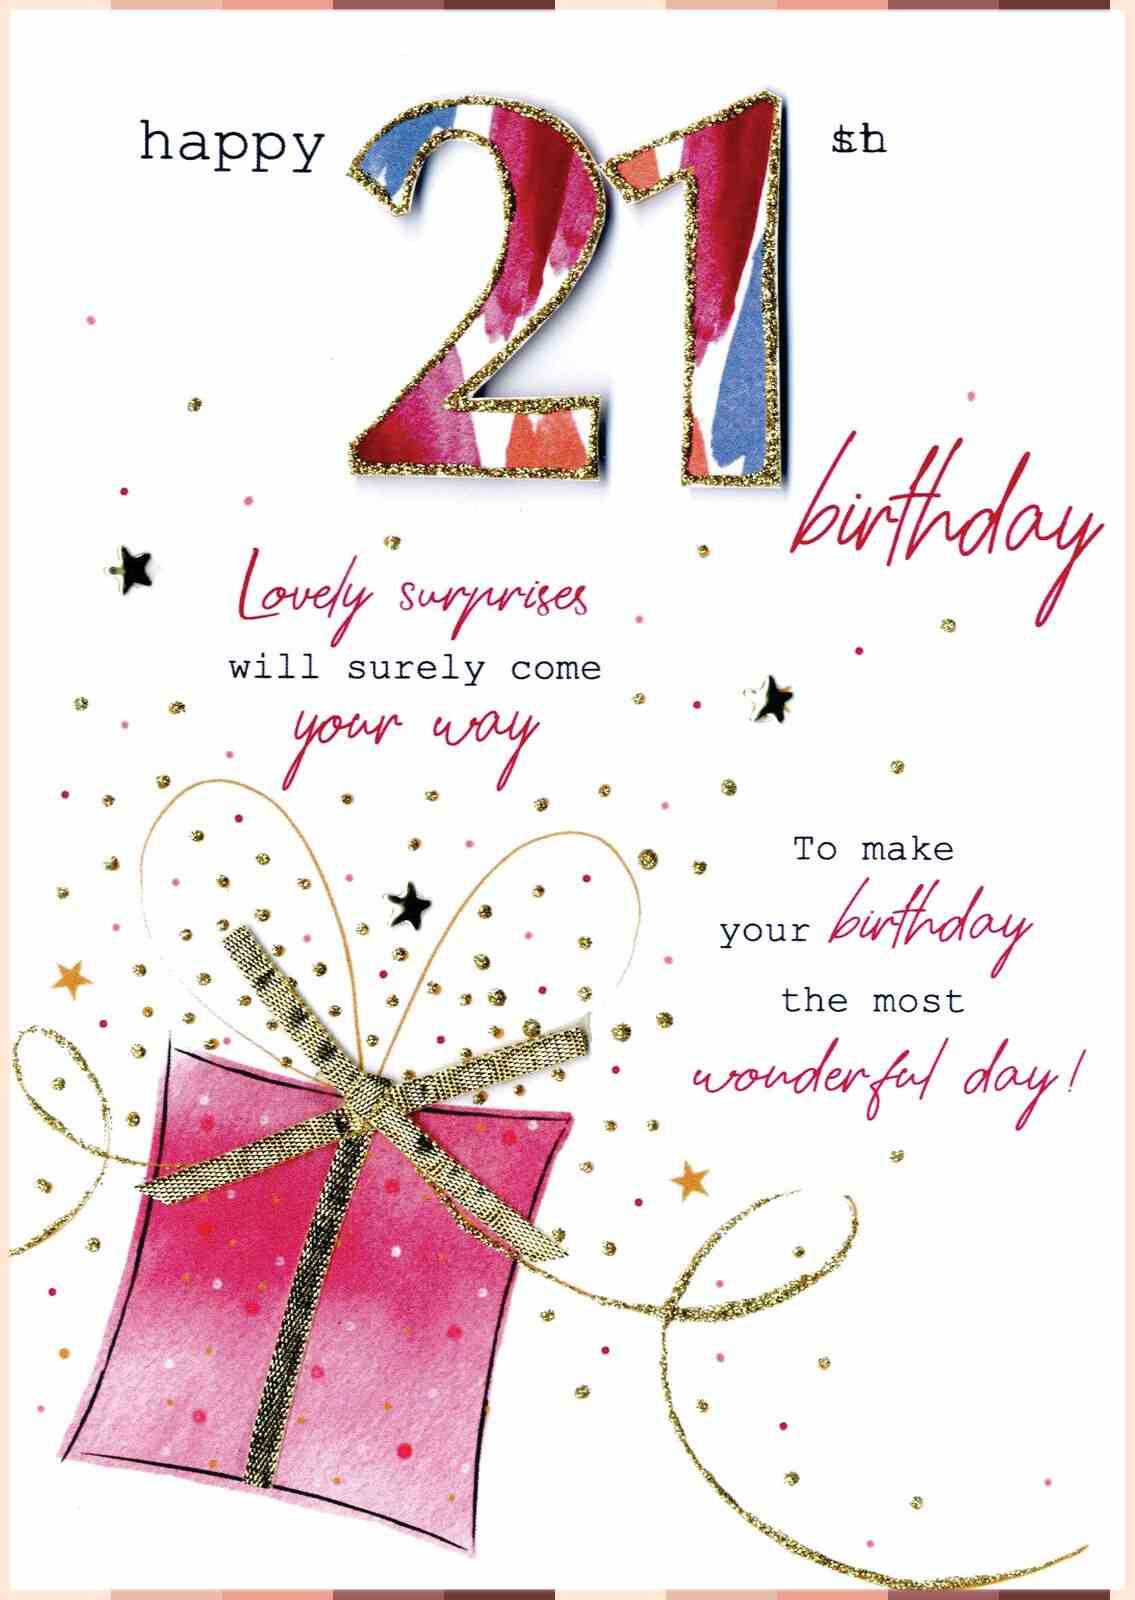 21st birthday images free download
